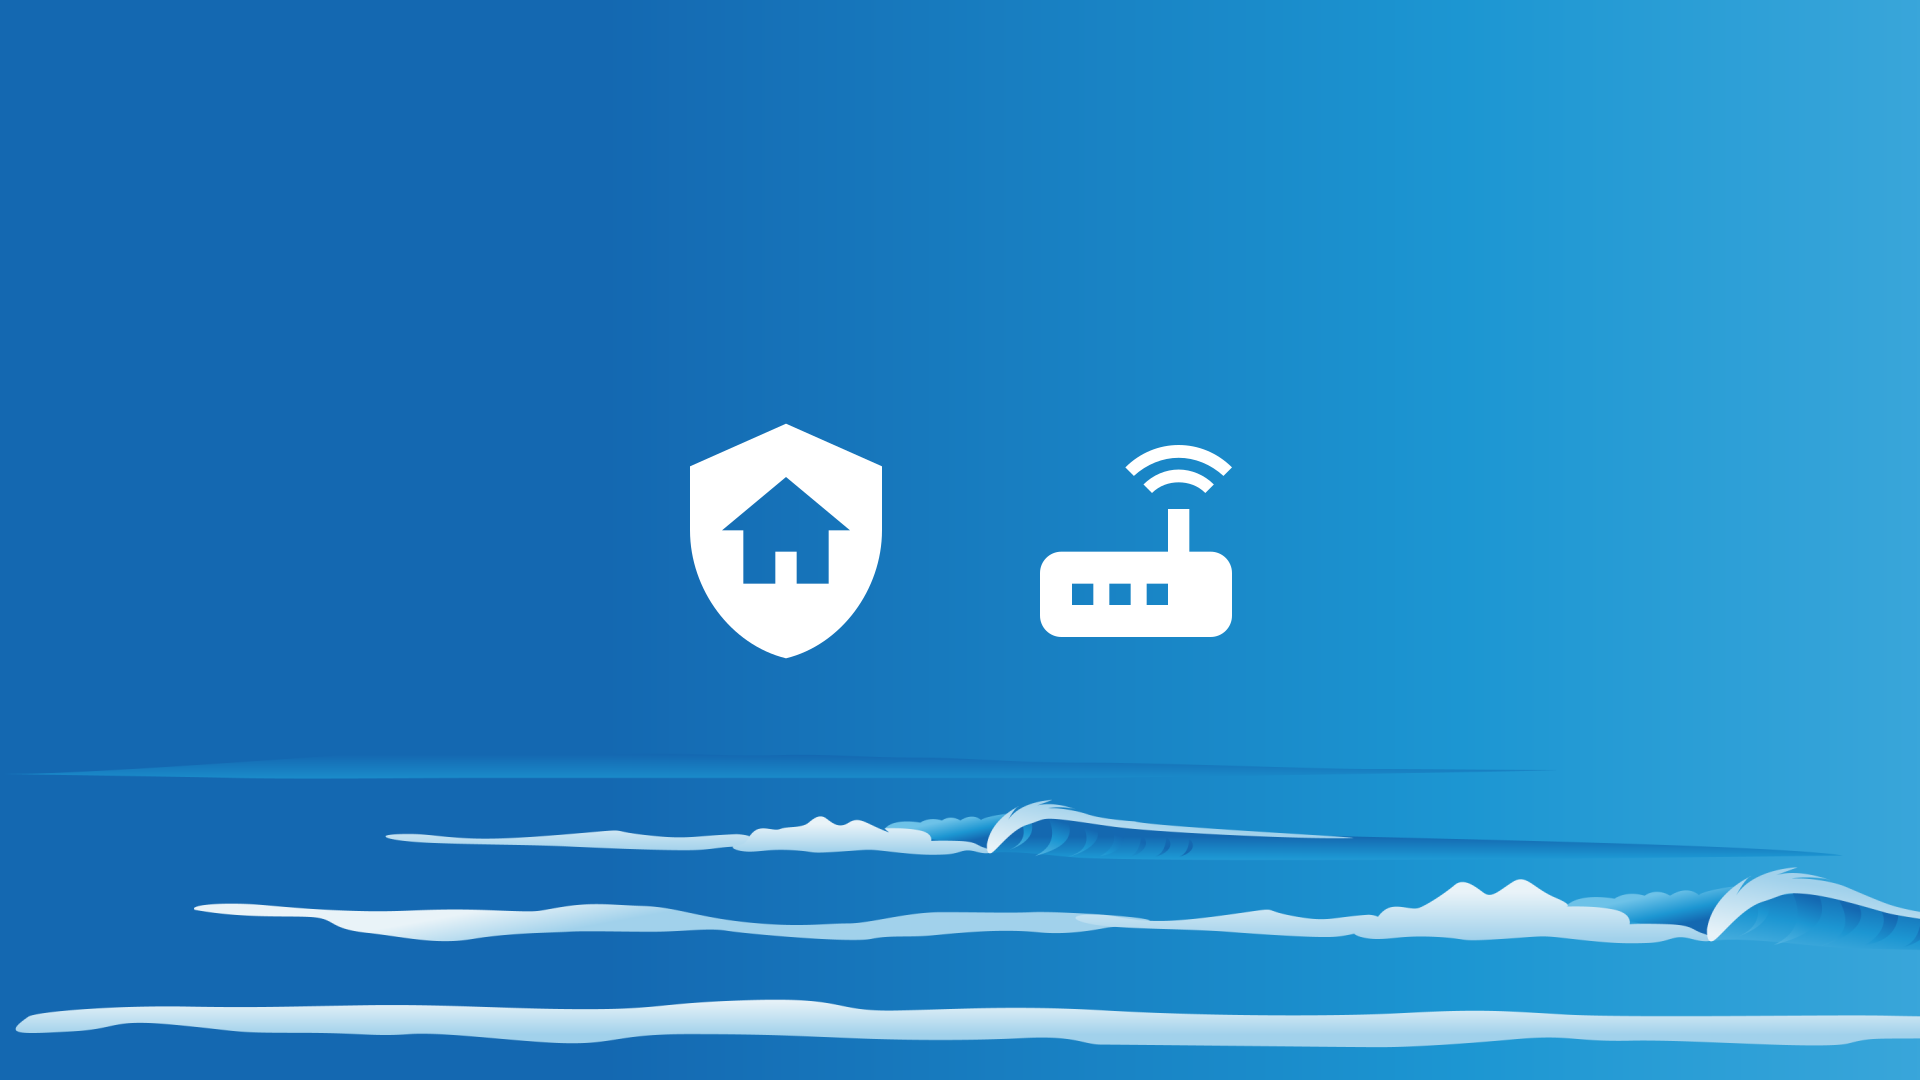 Sea background with router icon